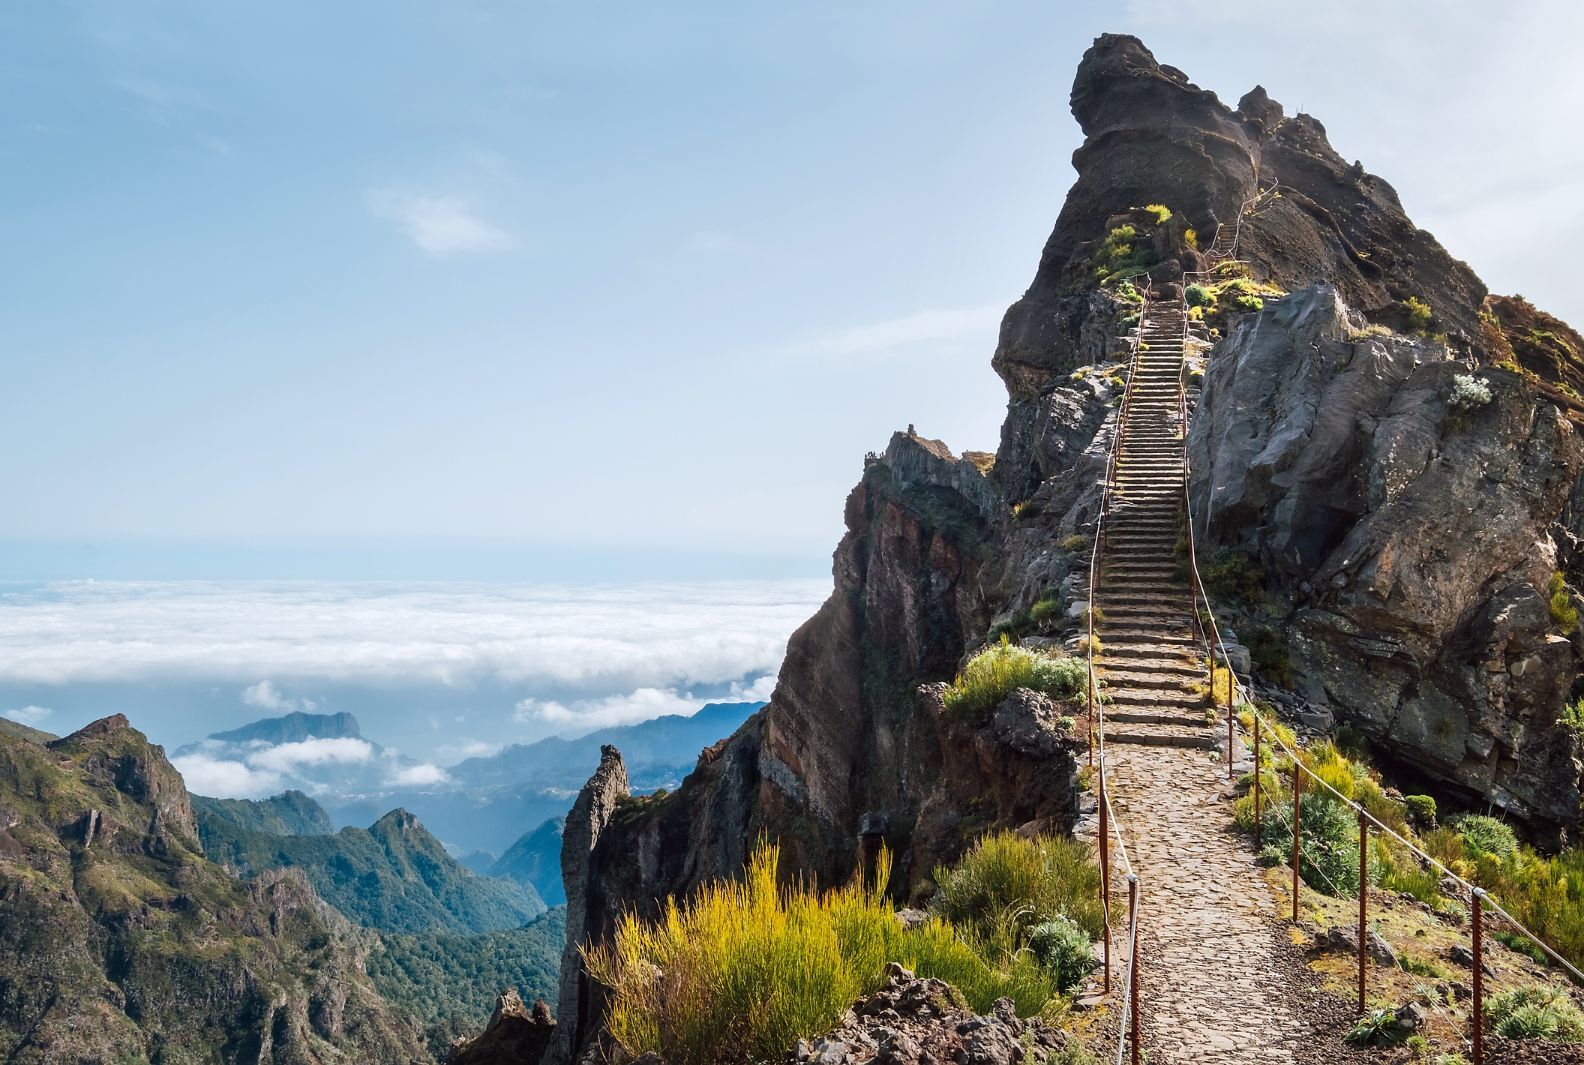 Stairs leading to the summit of Pico Ruivo, the highest mountain in Madeira.